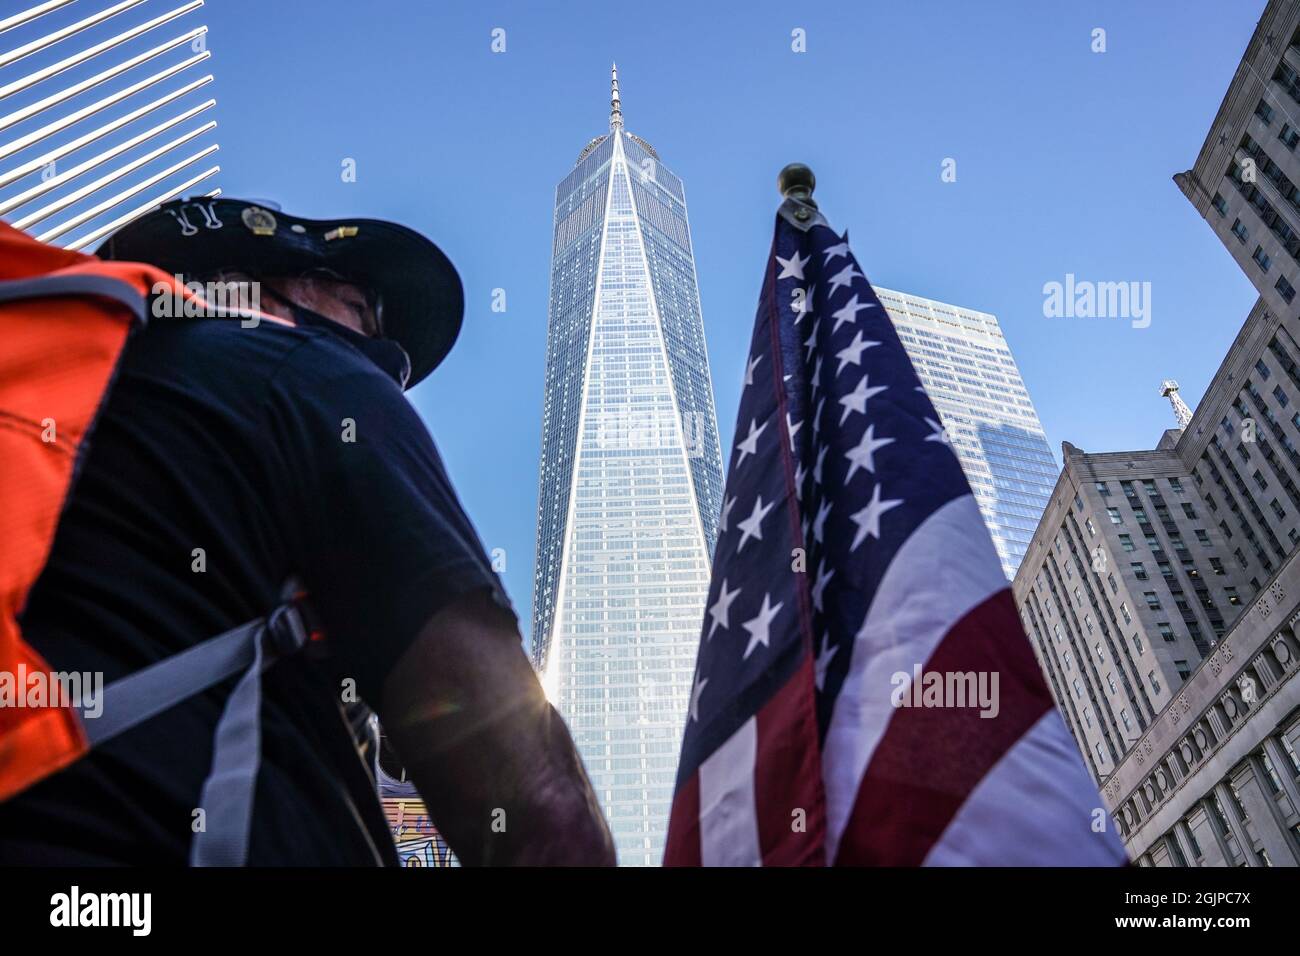 New York, USA. 11th Sep, 2021. People gather in front of One World Trade Center on the 20th anniversary of the September 11th terrorist attacks in New York, USA. Credit: Chase Sutton/Alamy Live News Stock Photo